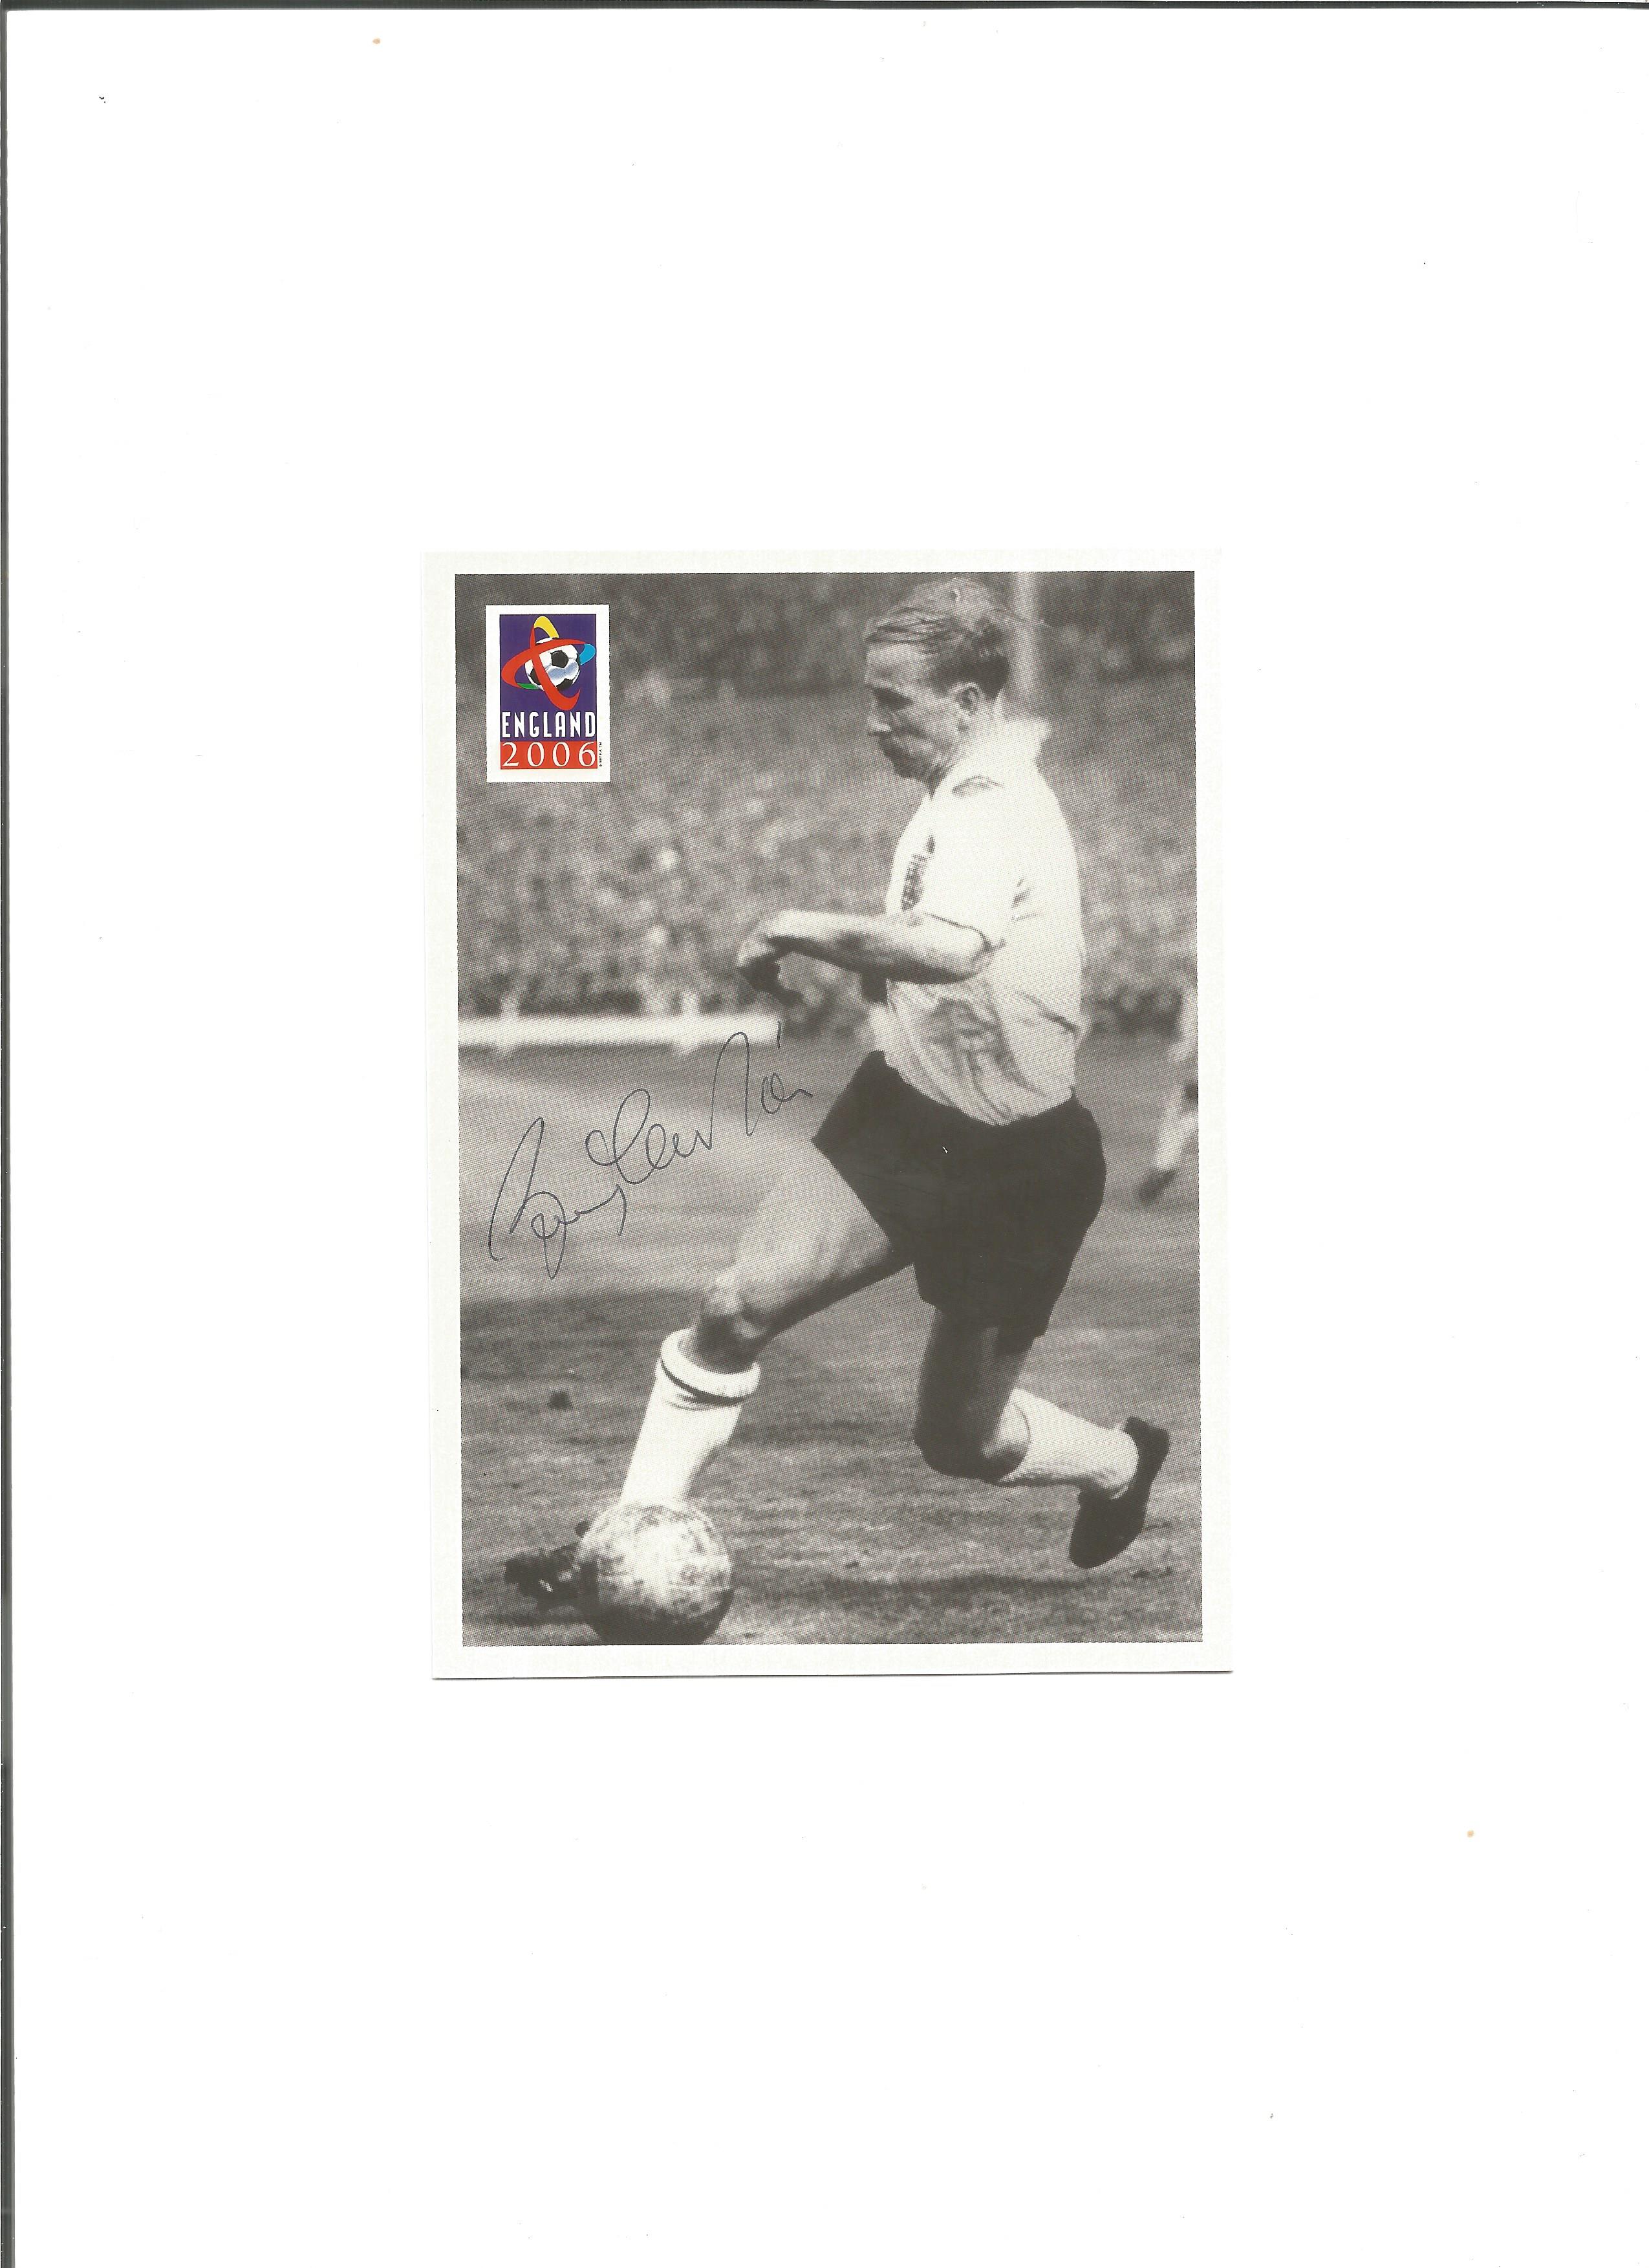 Bobby Charlton Signed England 1966 Promo Photo. Good Condition. All signed pieces come with a